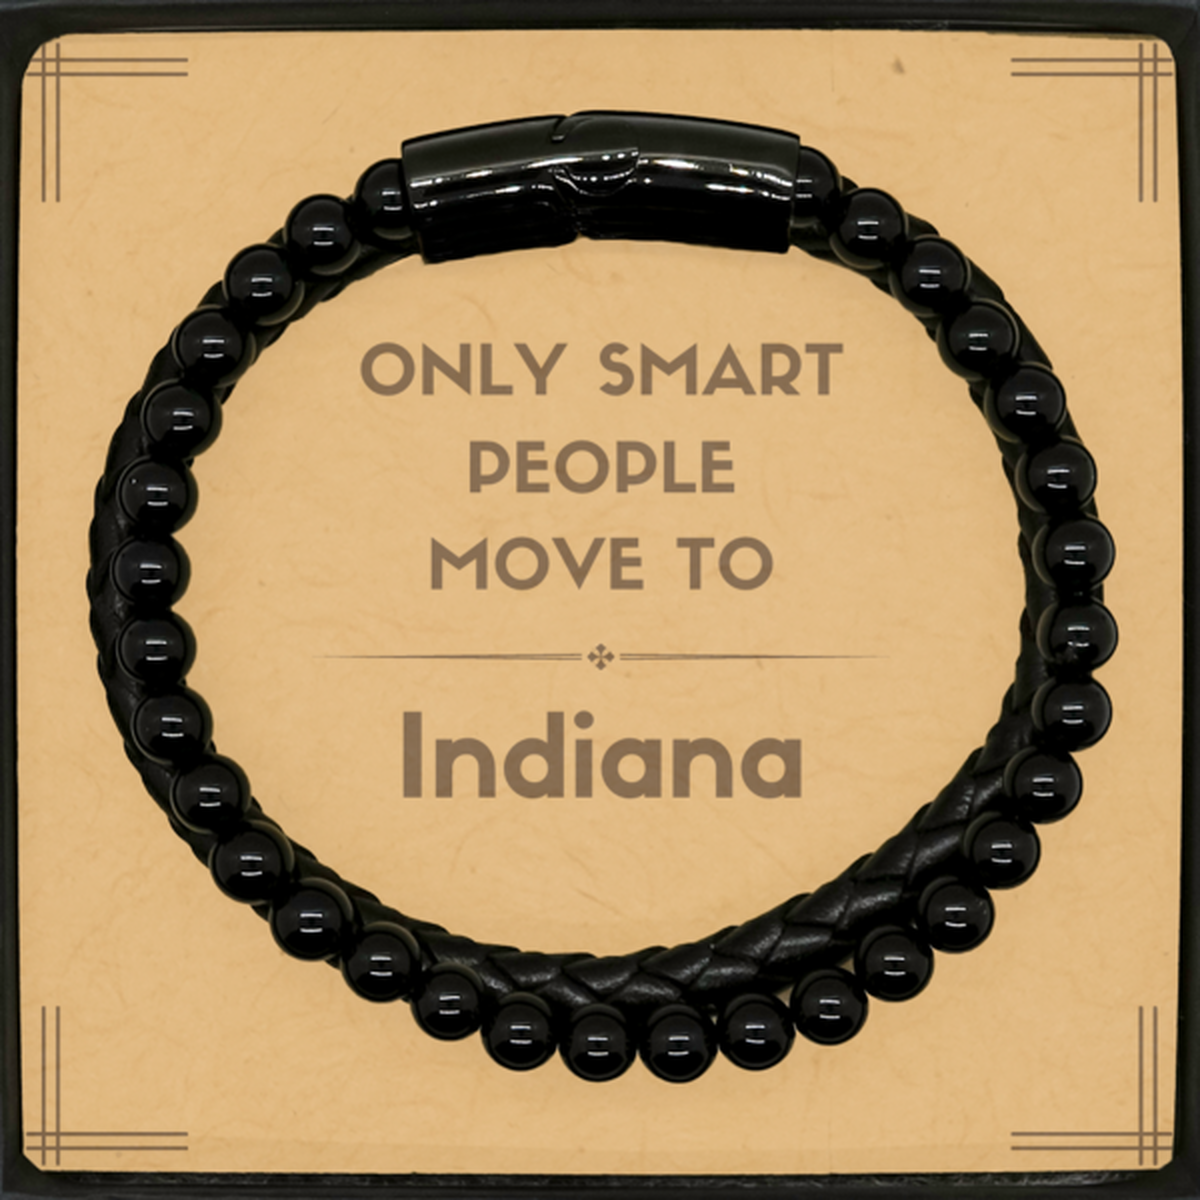 Only smart people move to Indiana Stone Leather Bracelets, Message Card Gifts For Indiana, Move to Indiana Gifts for Friends Coworker Funny Saying Quote